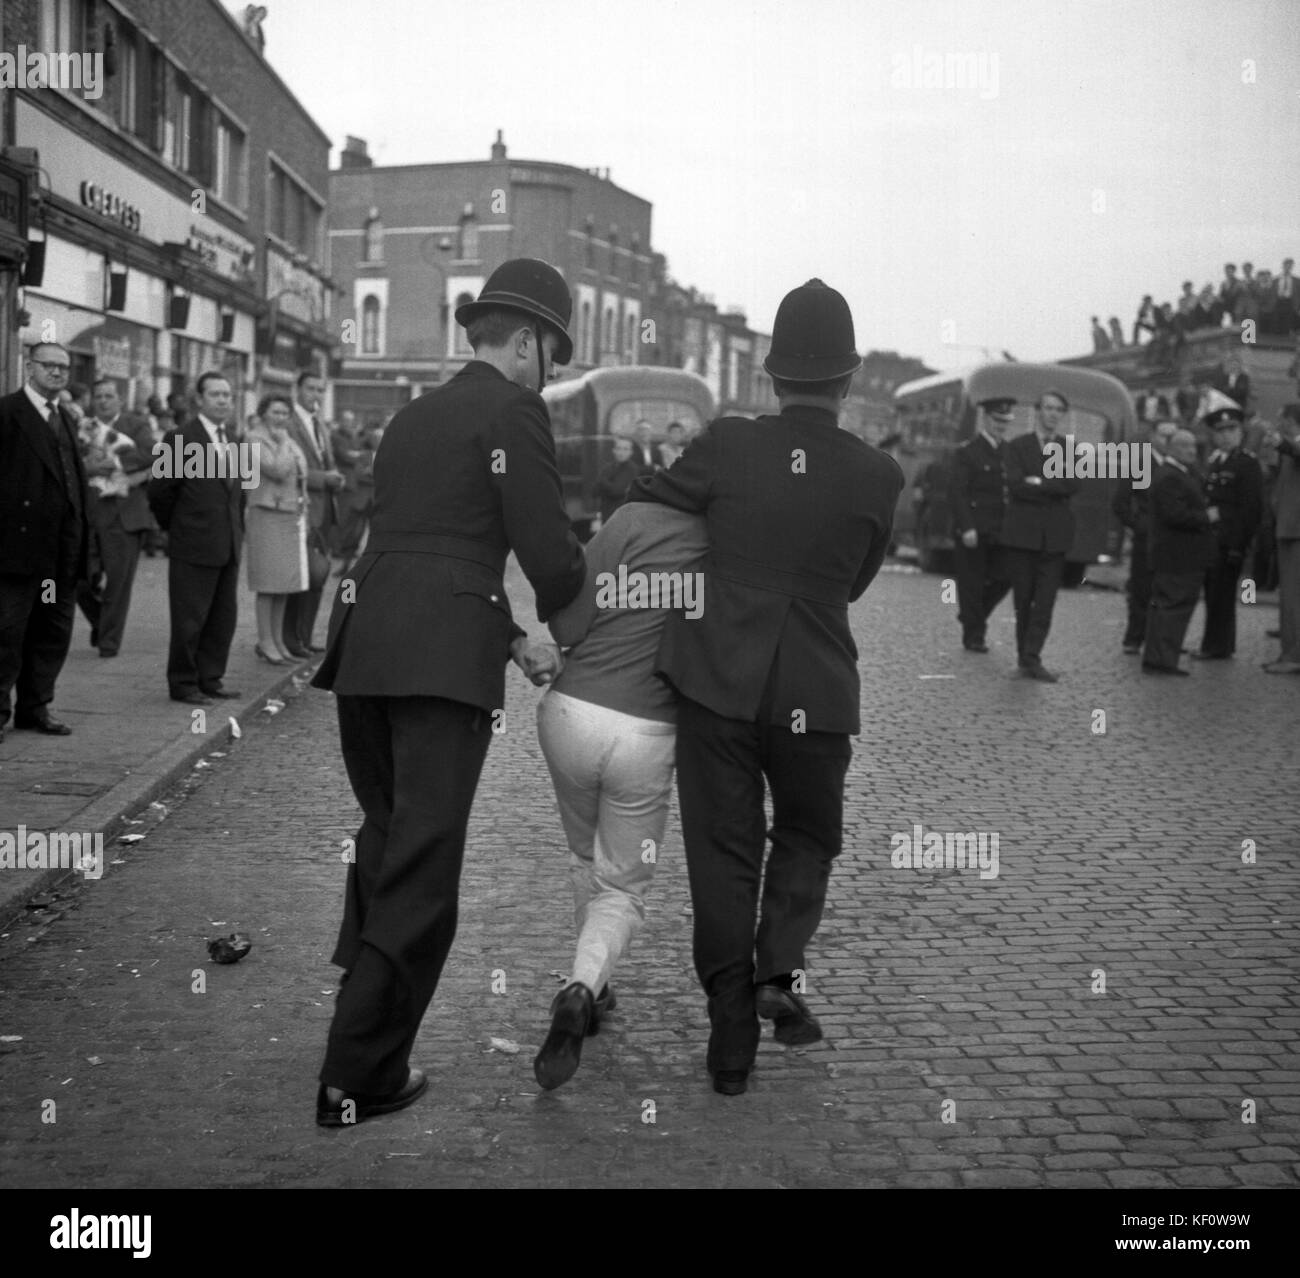 Firmly grasped by two police officers, a man is removed from the meeting of Sir Oswald Mosley's Union Movement at Ridley Road, Dalston, London. the hostile crowd shouted and booed as Sir Oswald tried to speak, and after five minutes he ended the meeting on police advice. Stock Photo